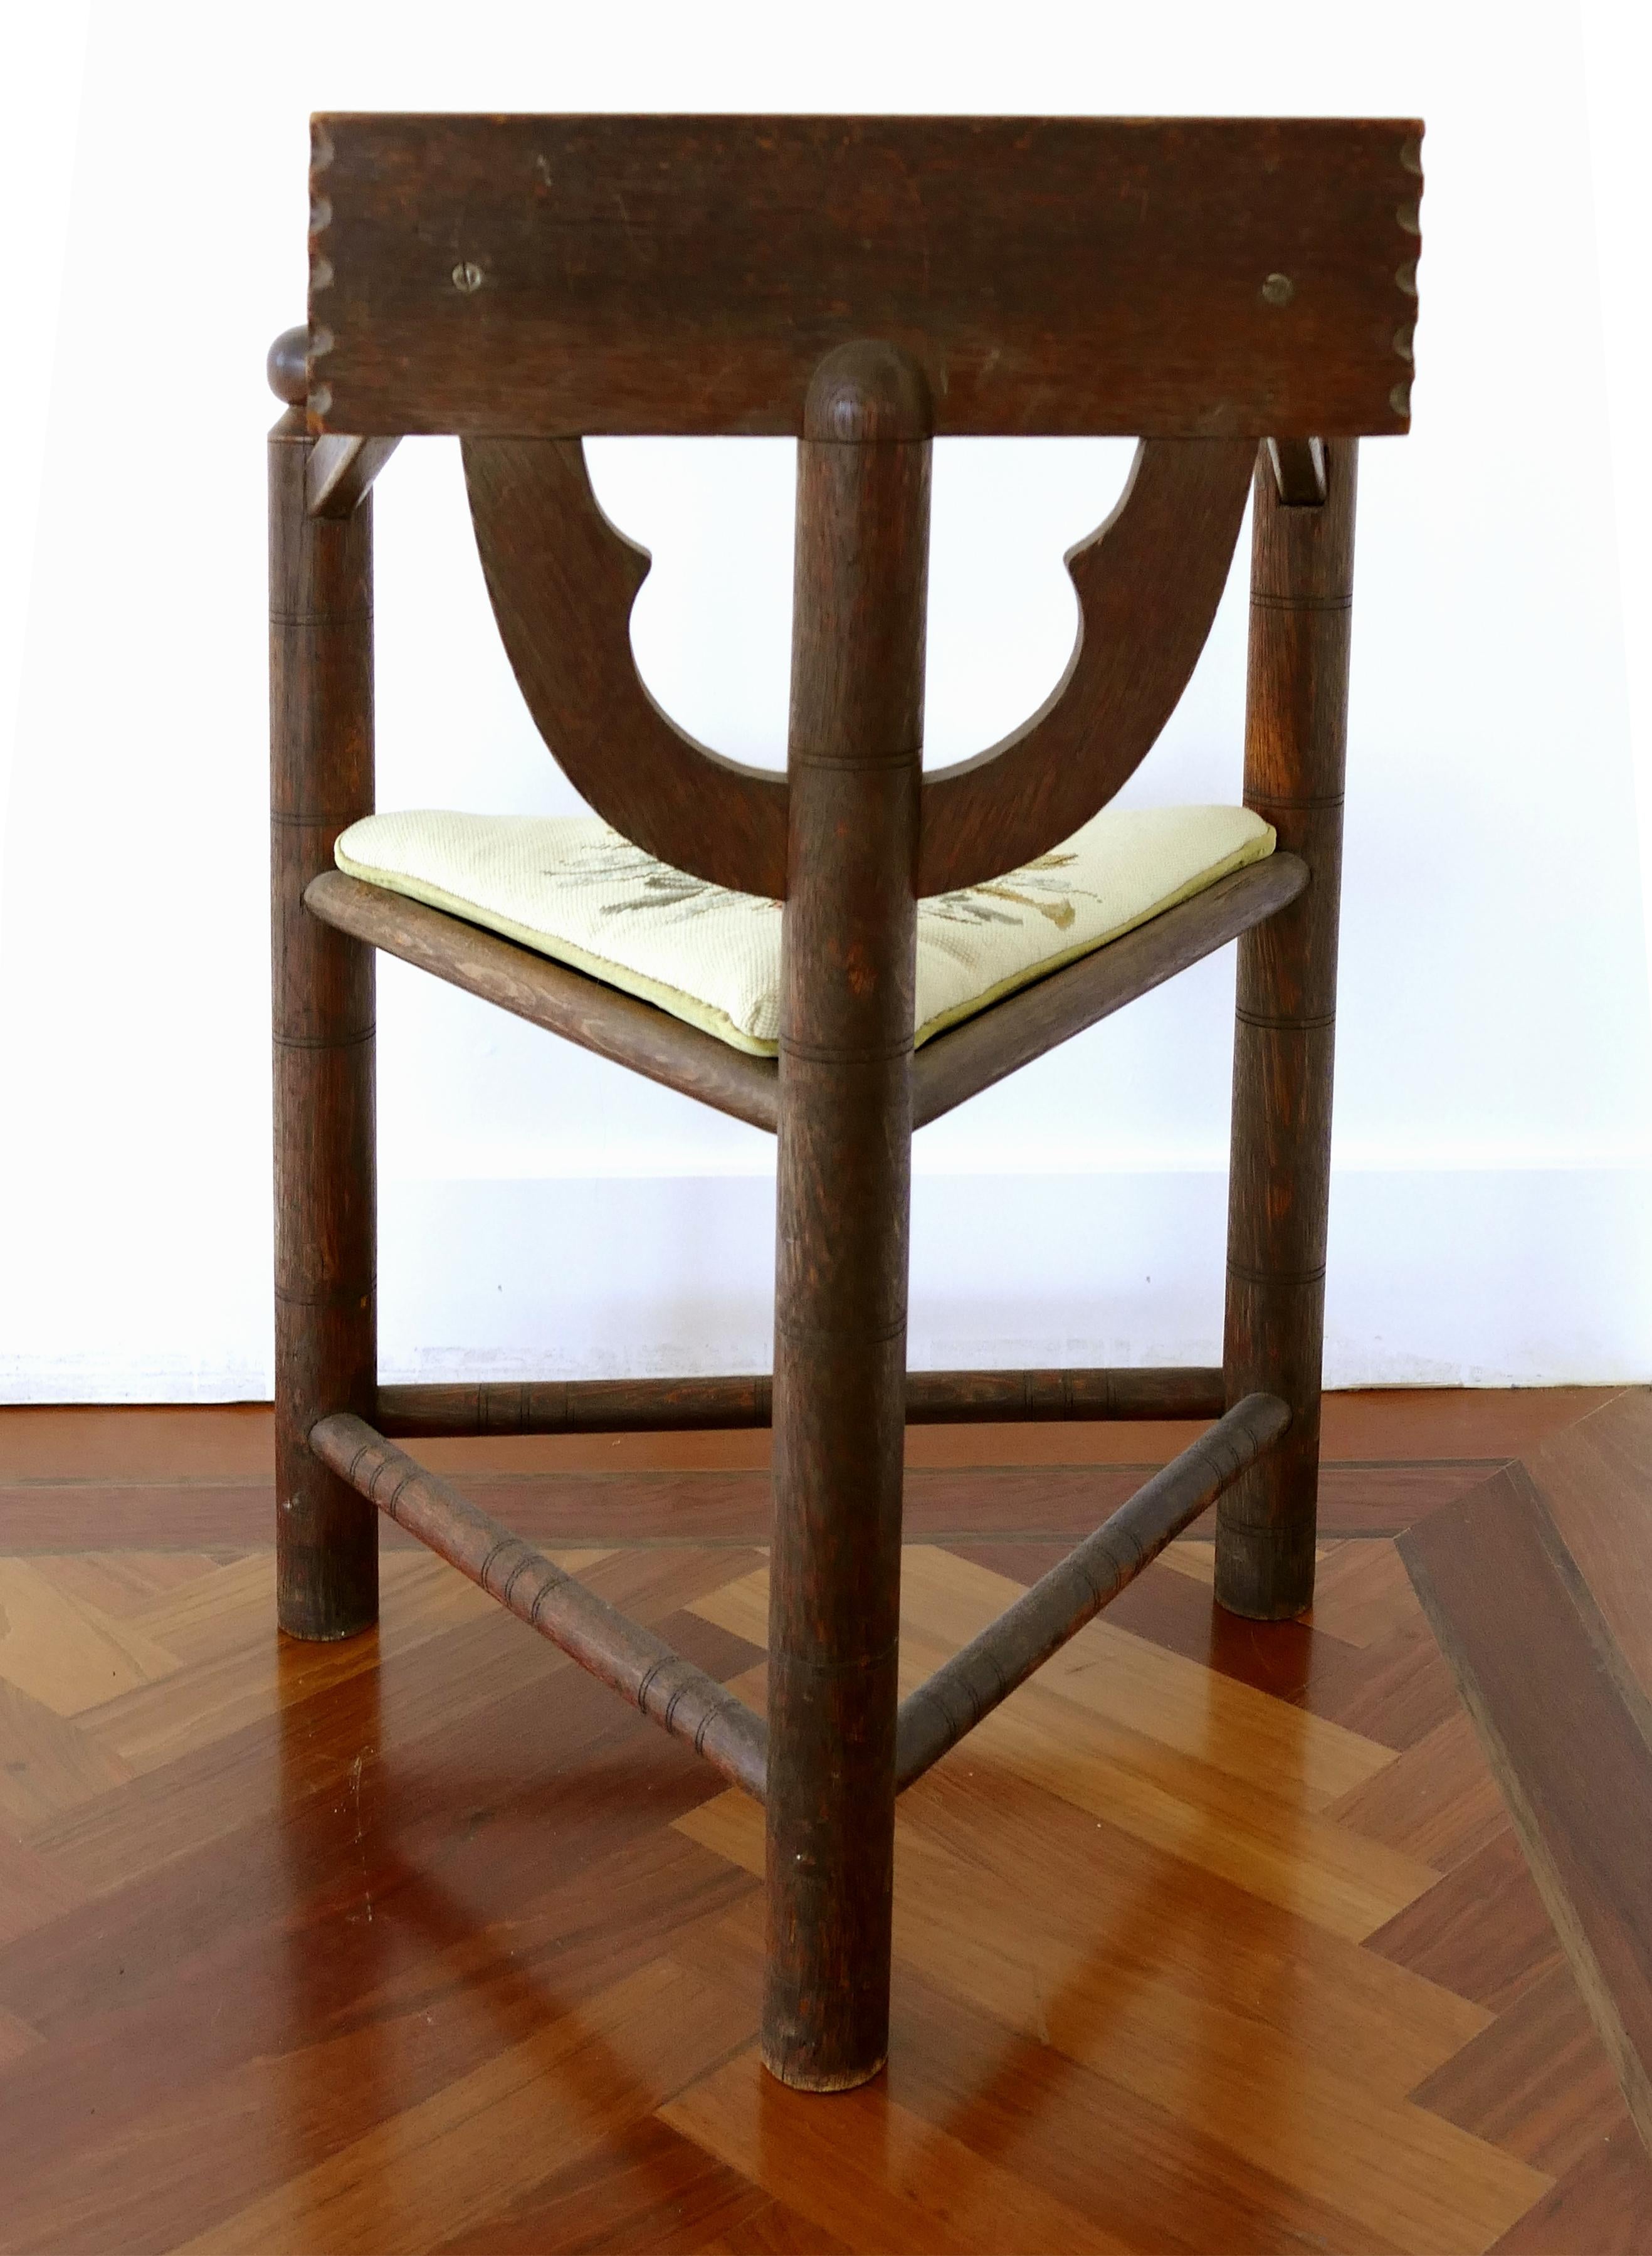 Hand-Carved 19th-Century Swedish Monk's Corner Chair with Needlepoint Cushion